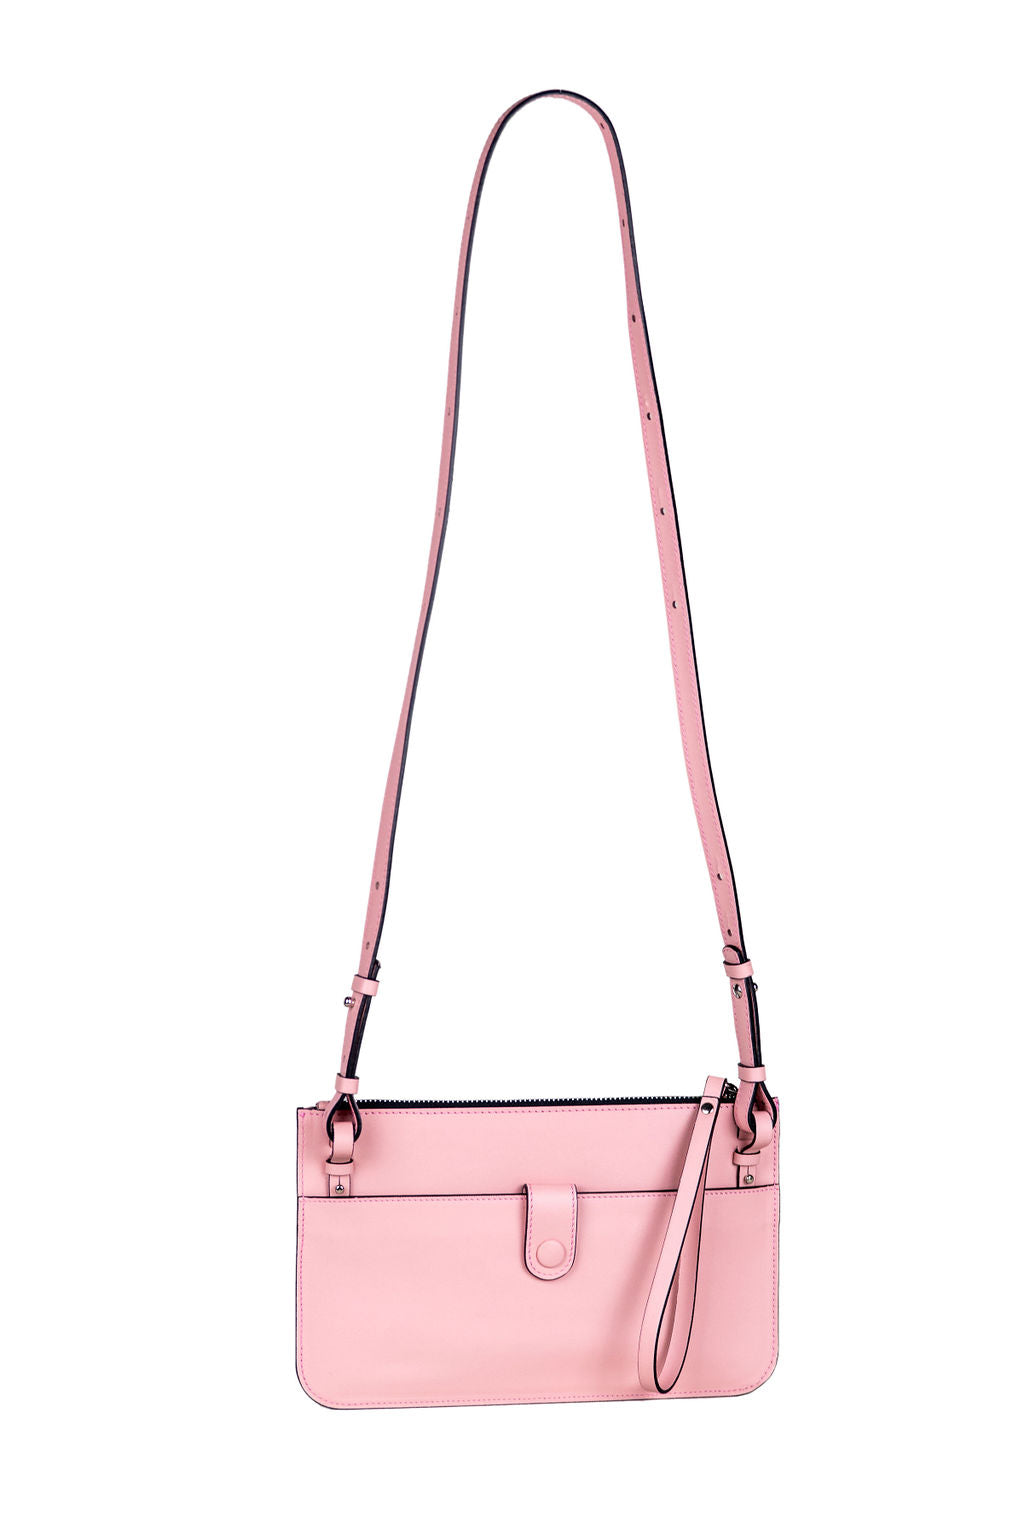 Brooklyn- Pink Leather with Black Trim